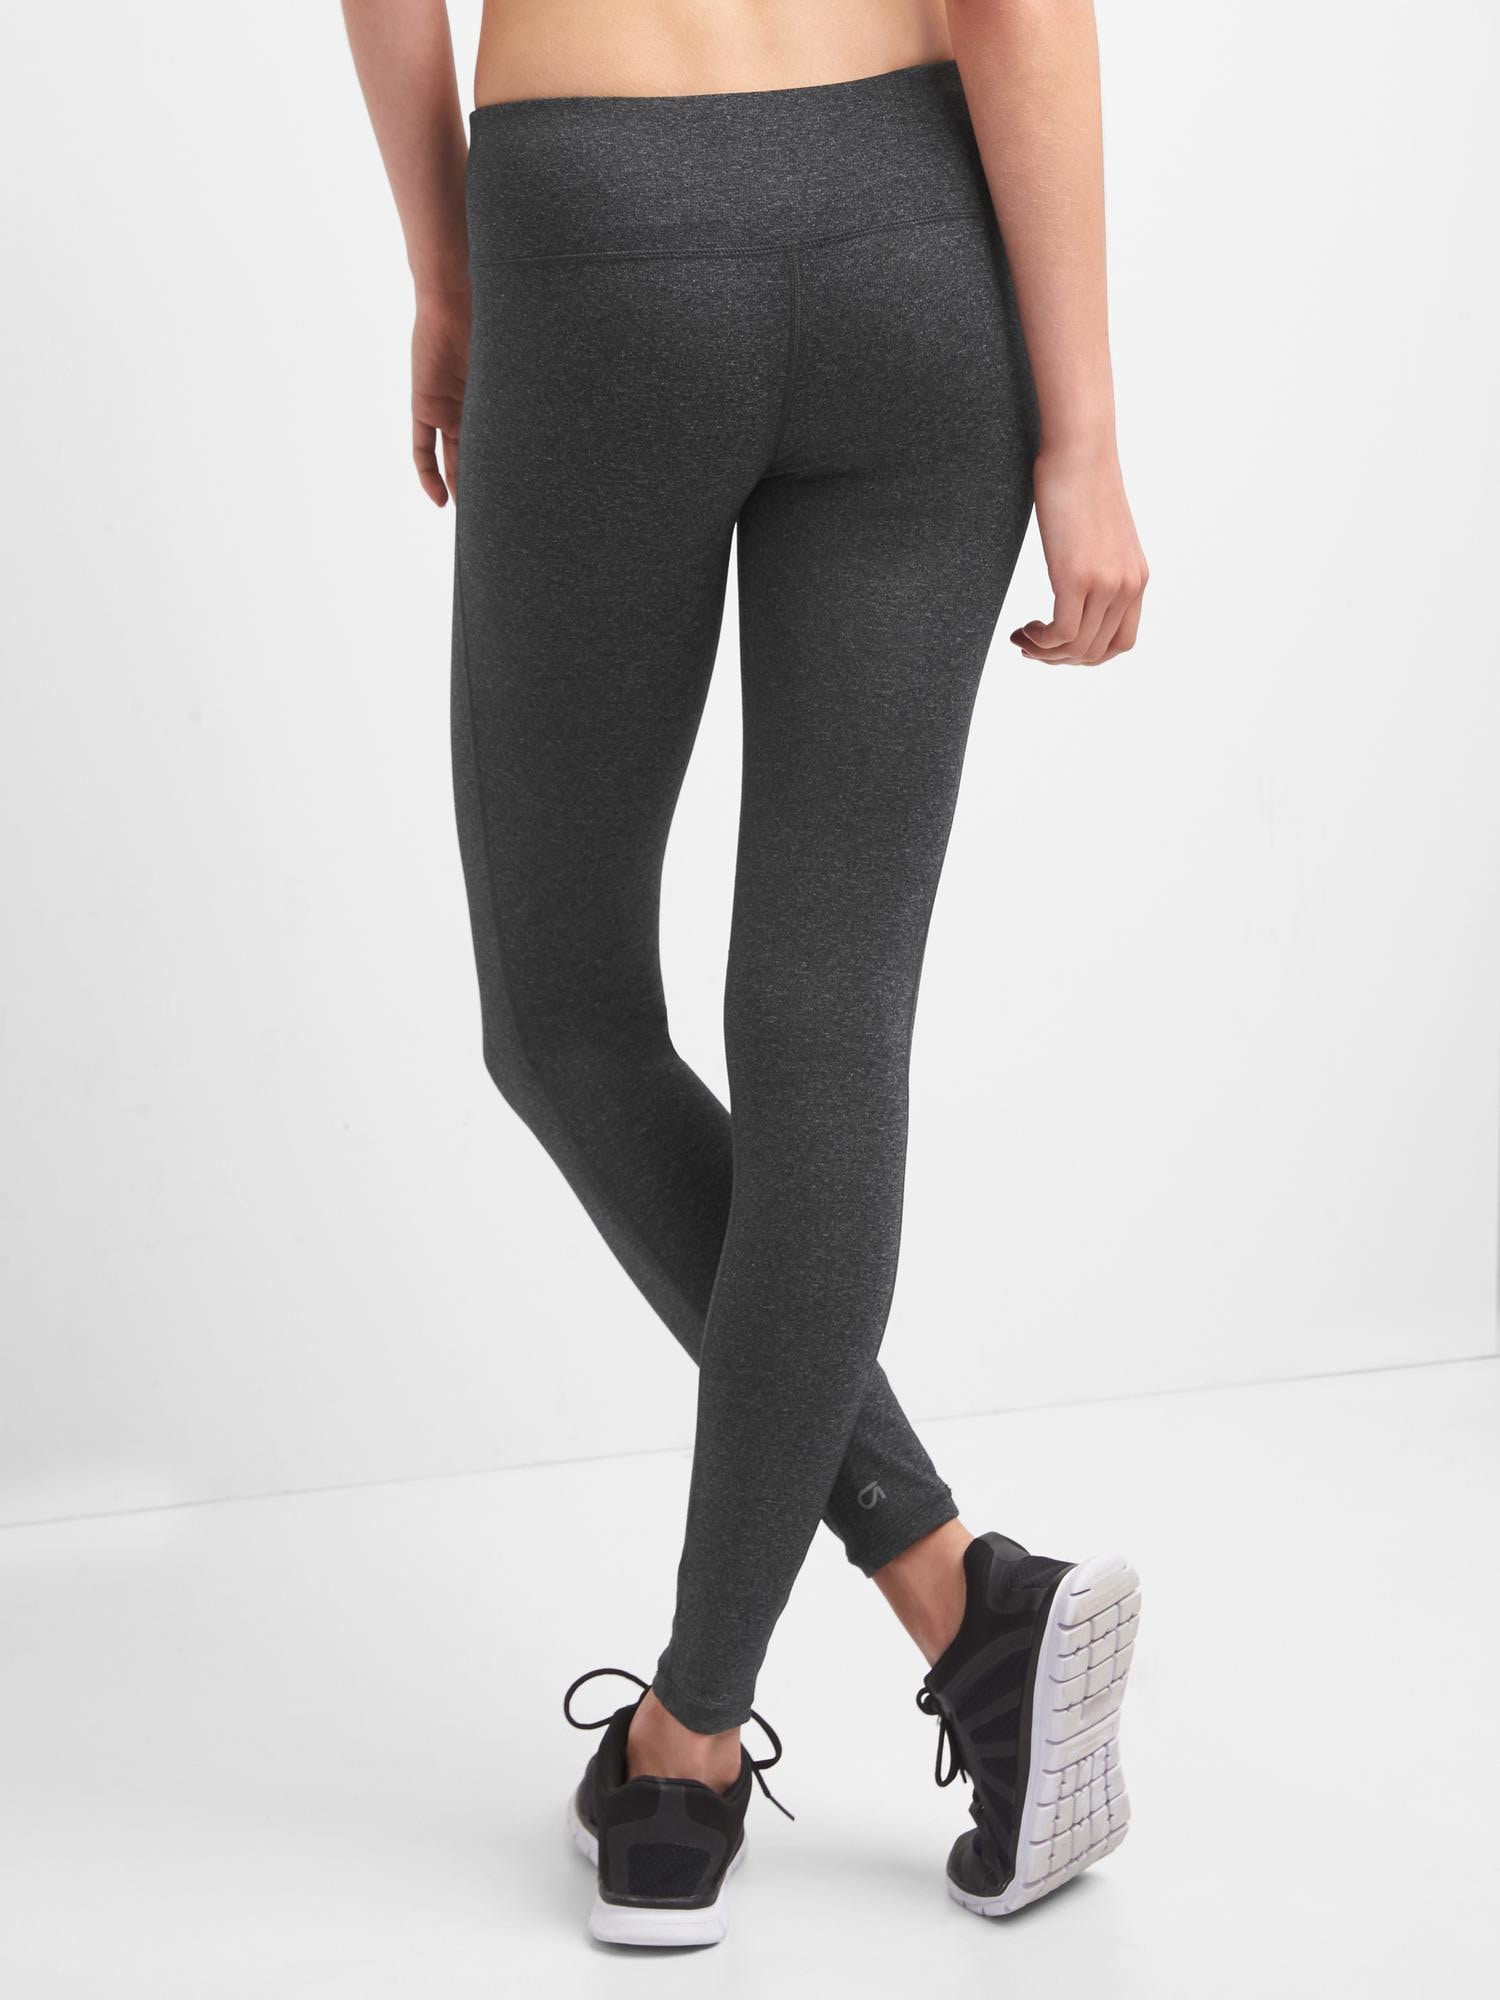 Womens Super Low Rise Fitness Leggings in Heather Grey Cotton